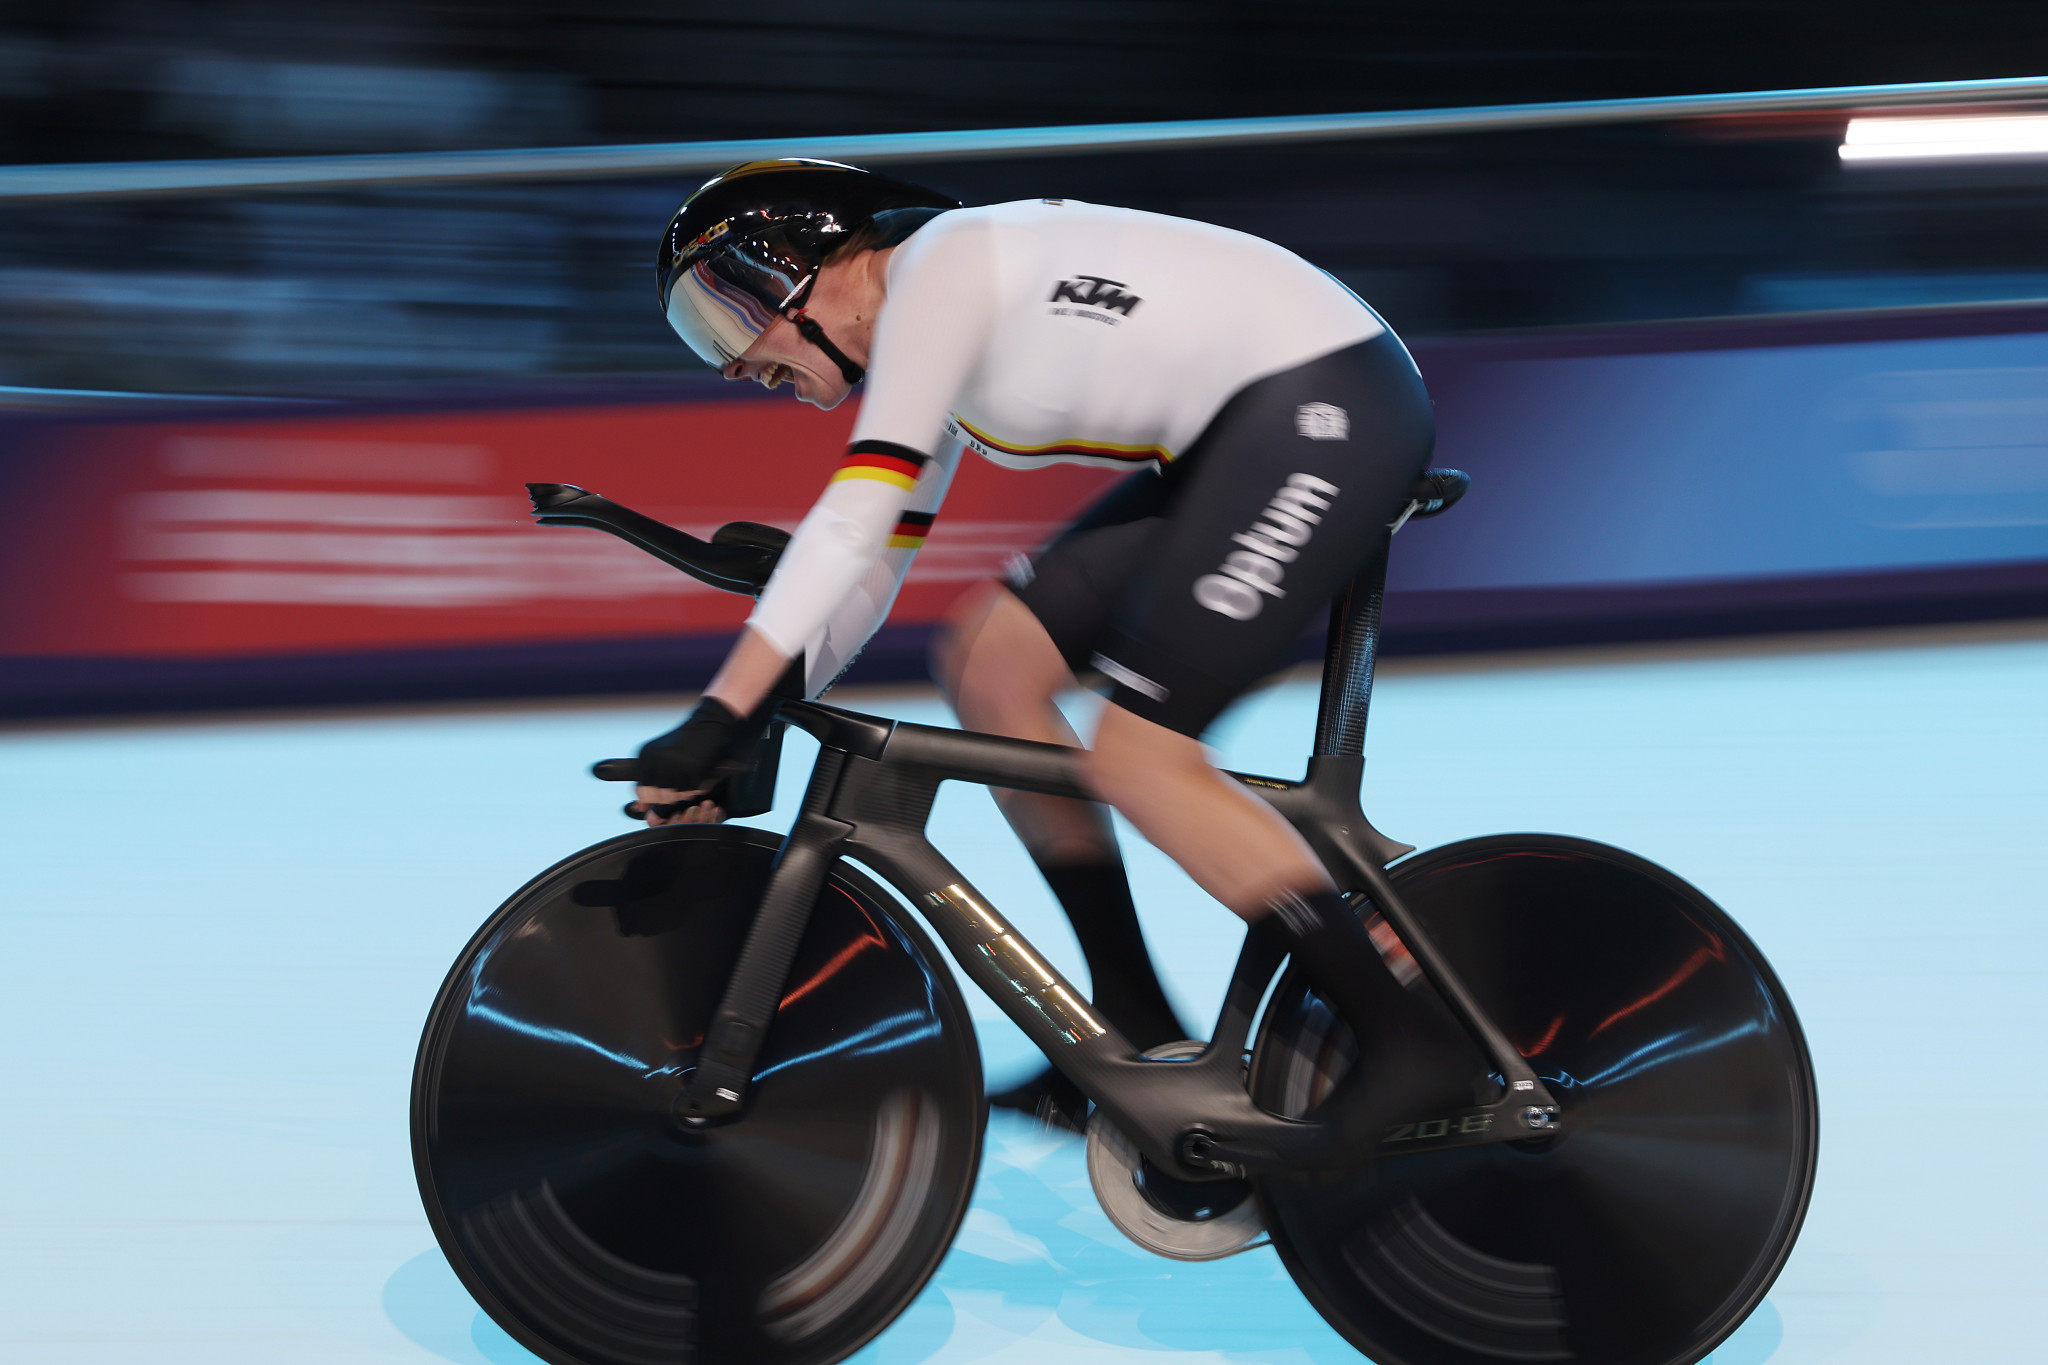 The women’s individual pursuit final saw Tokyo 2020 team pursuit winner Mieke Kröger grab another gold for the Germans ©Getty Images